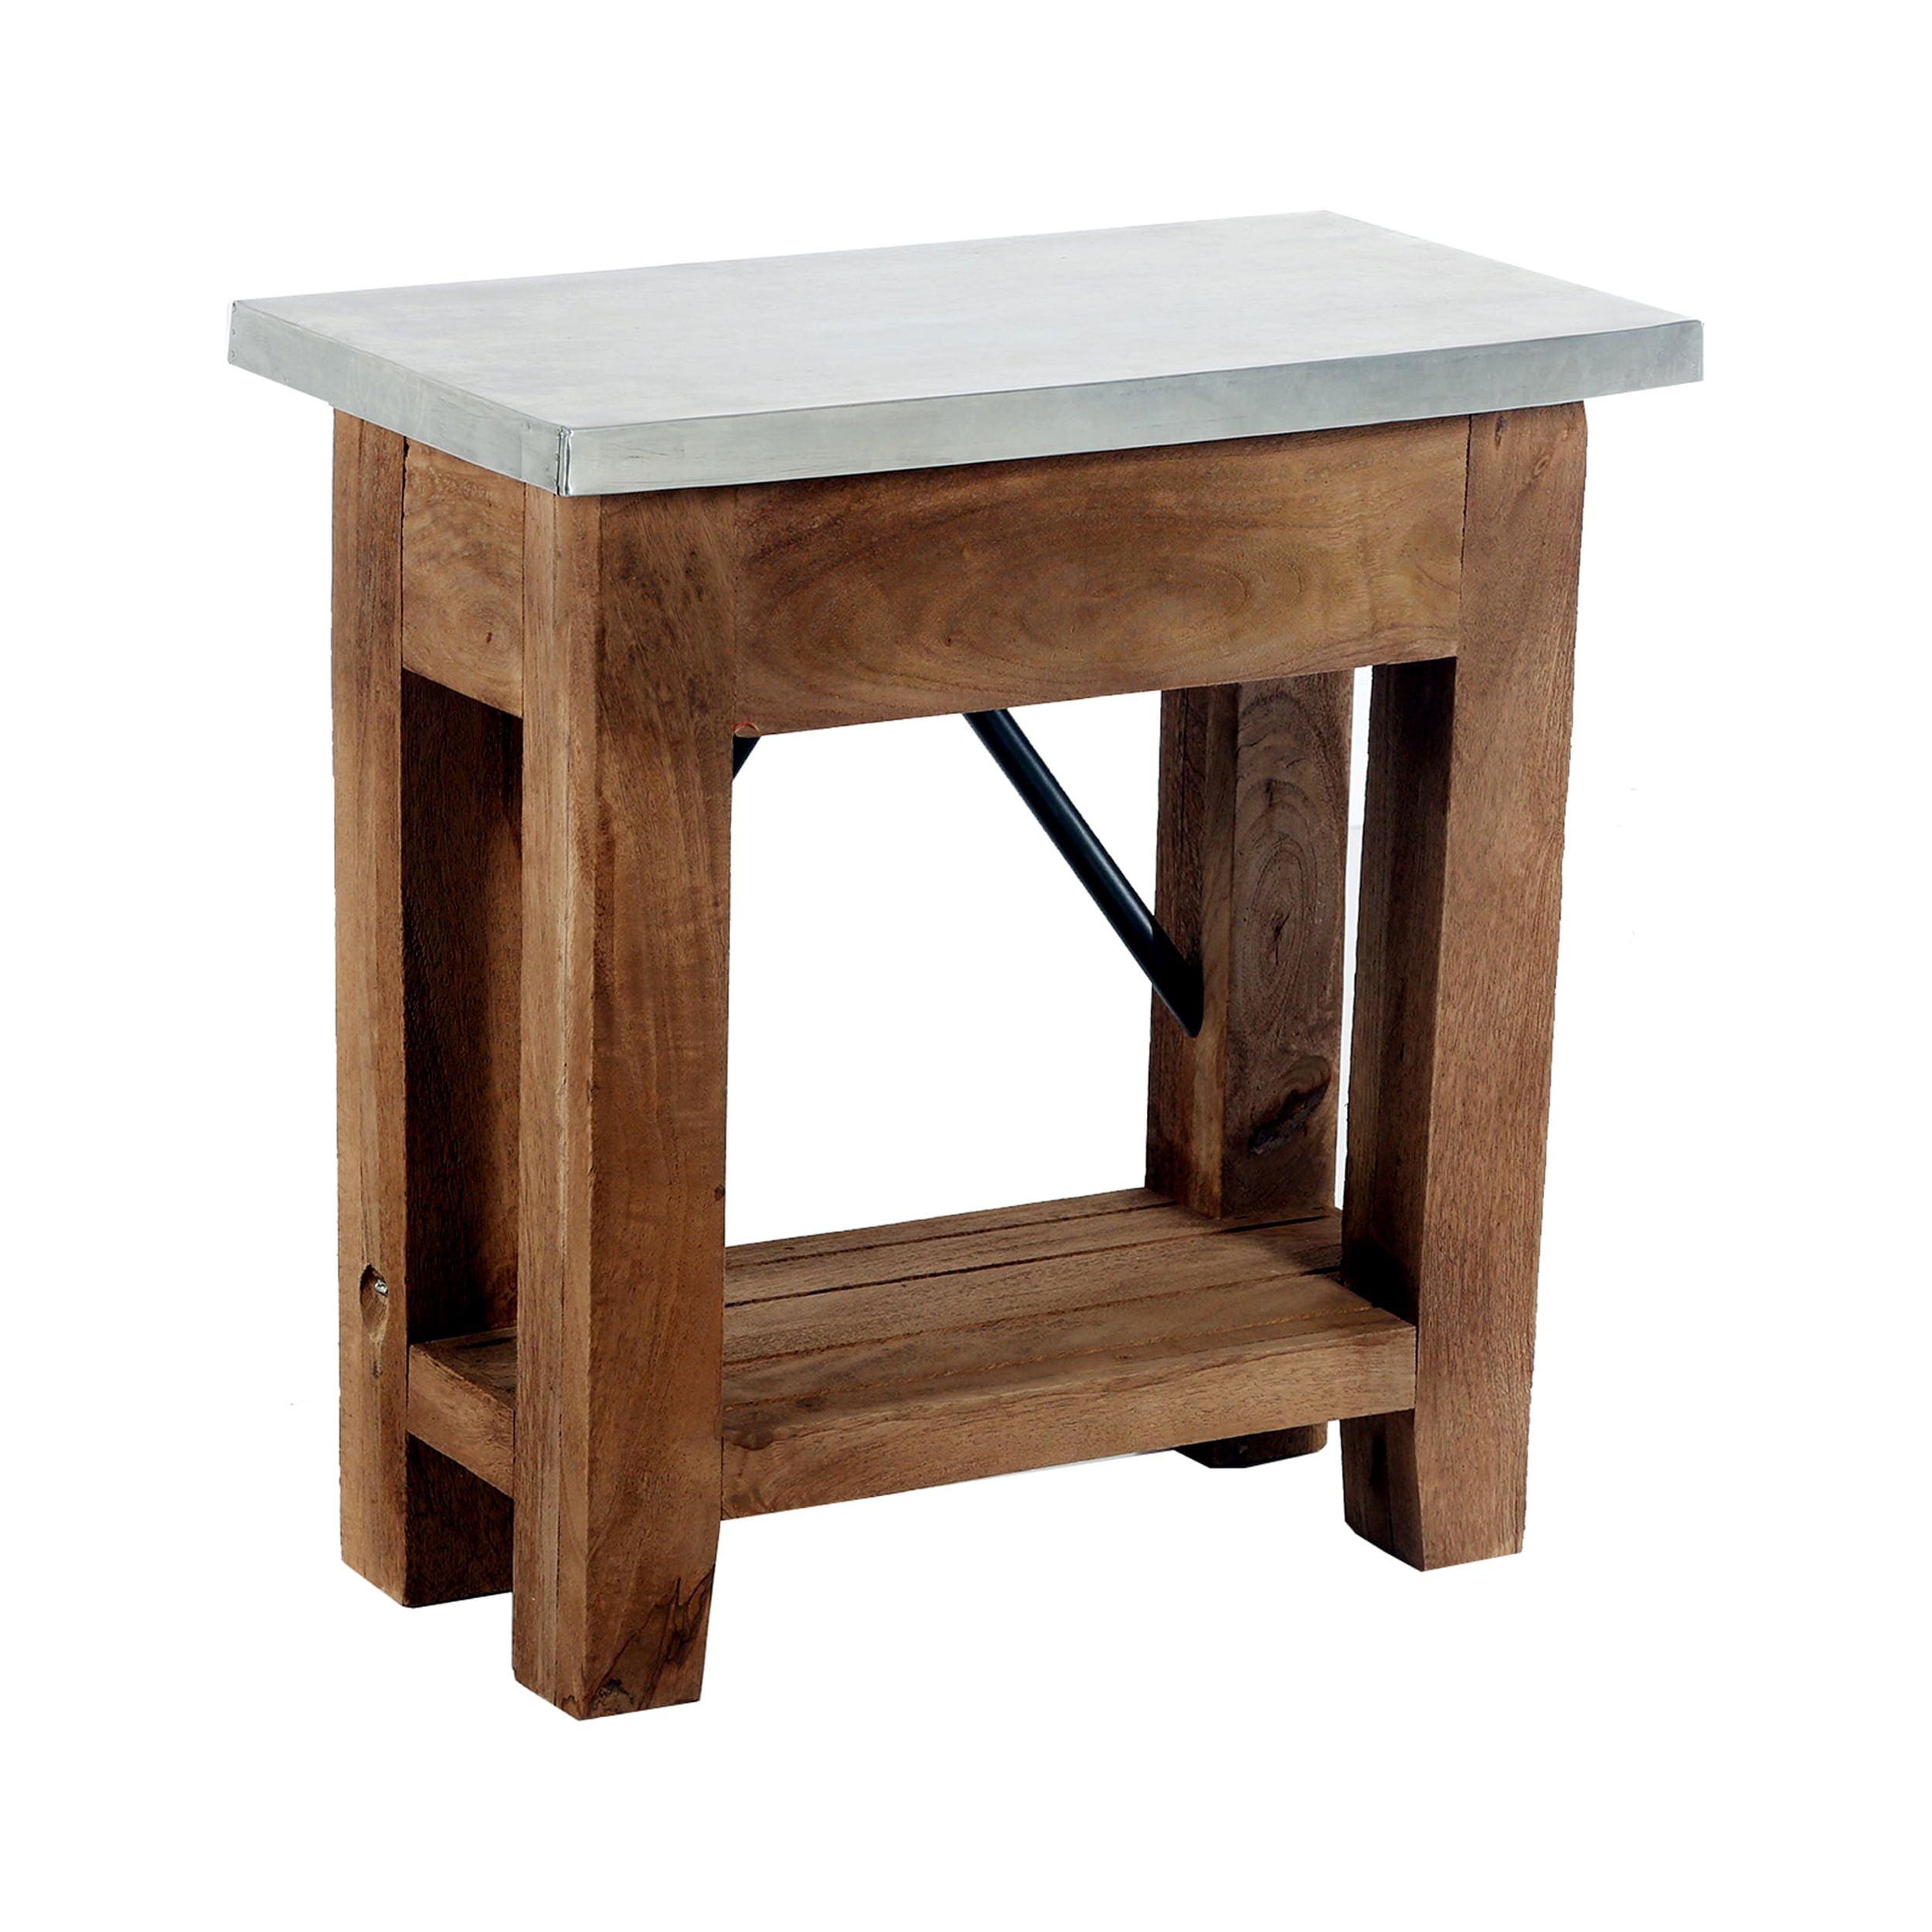 Modern Industrial Zinc & Wood Accent End Table with Shelf